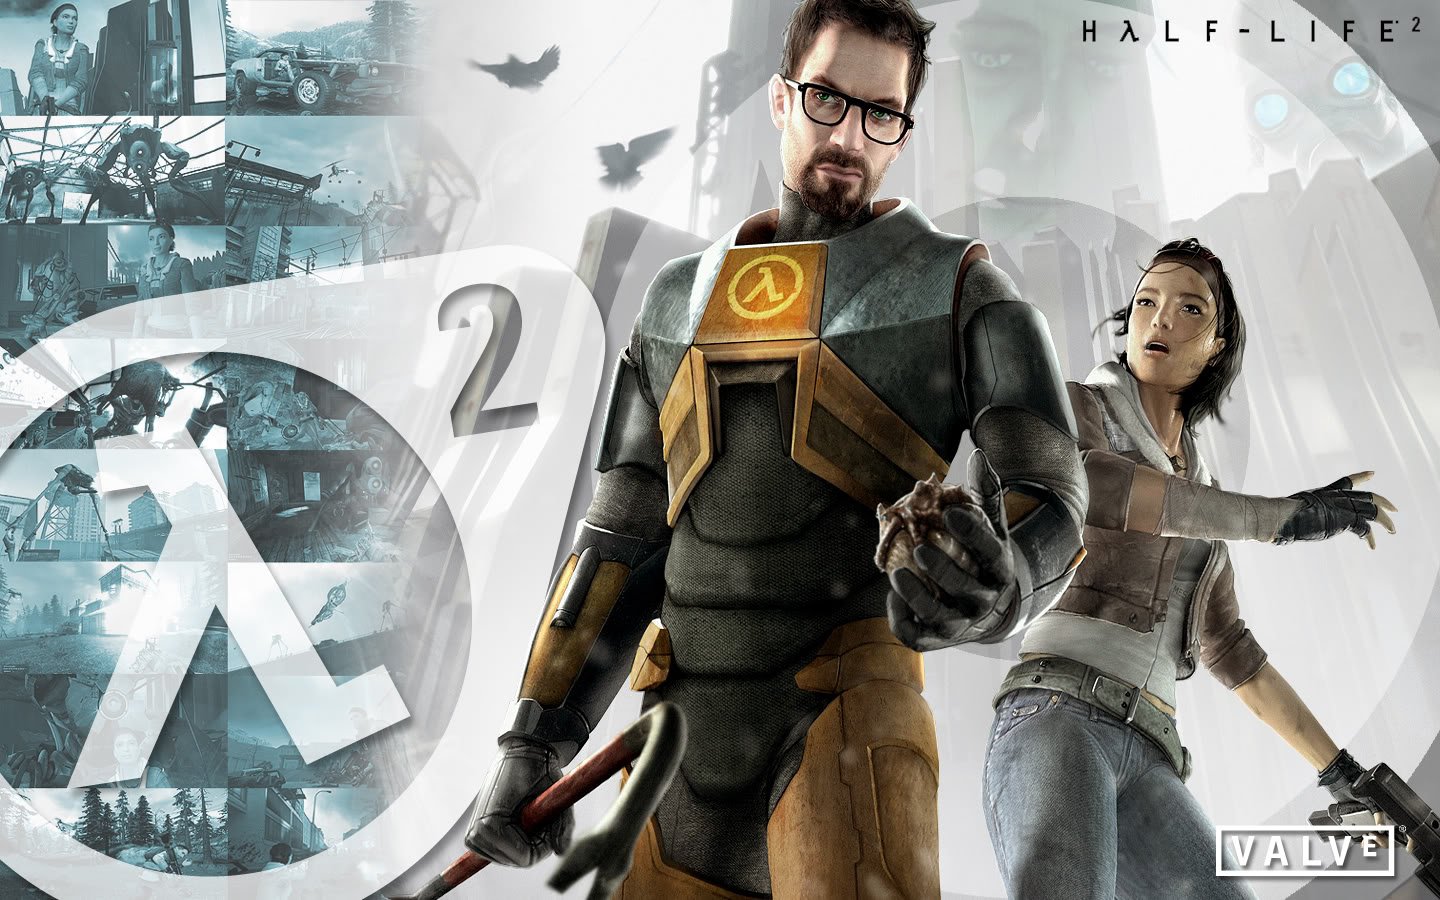 order to play half life games